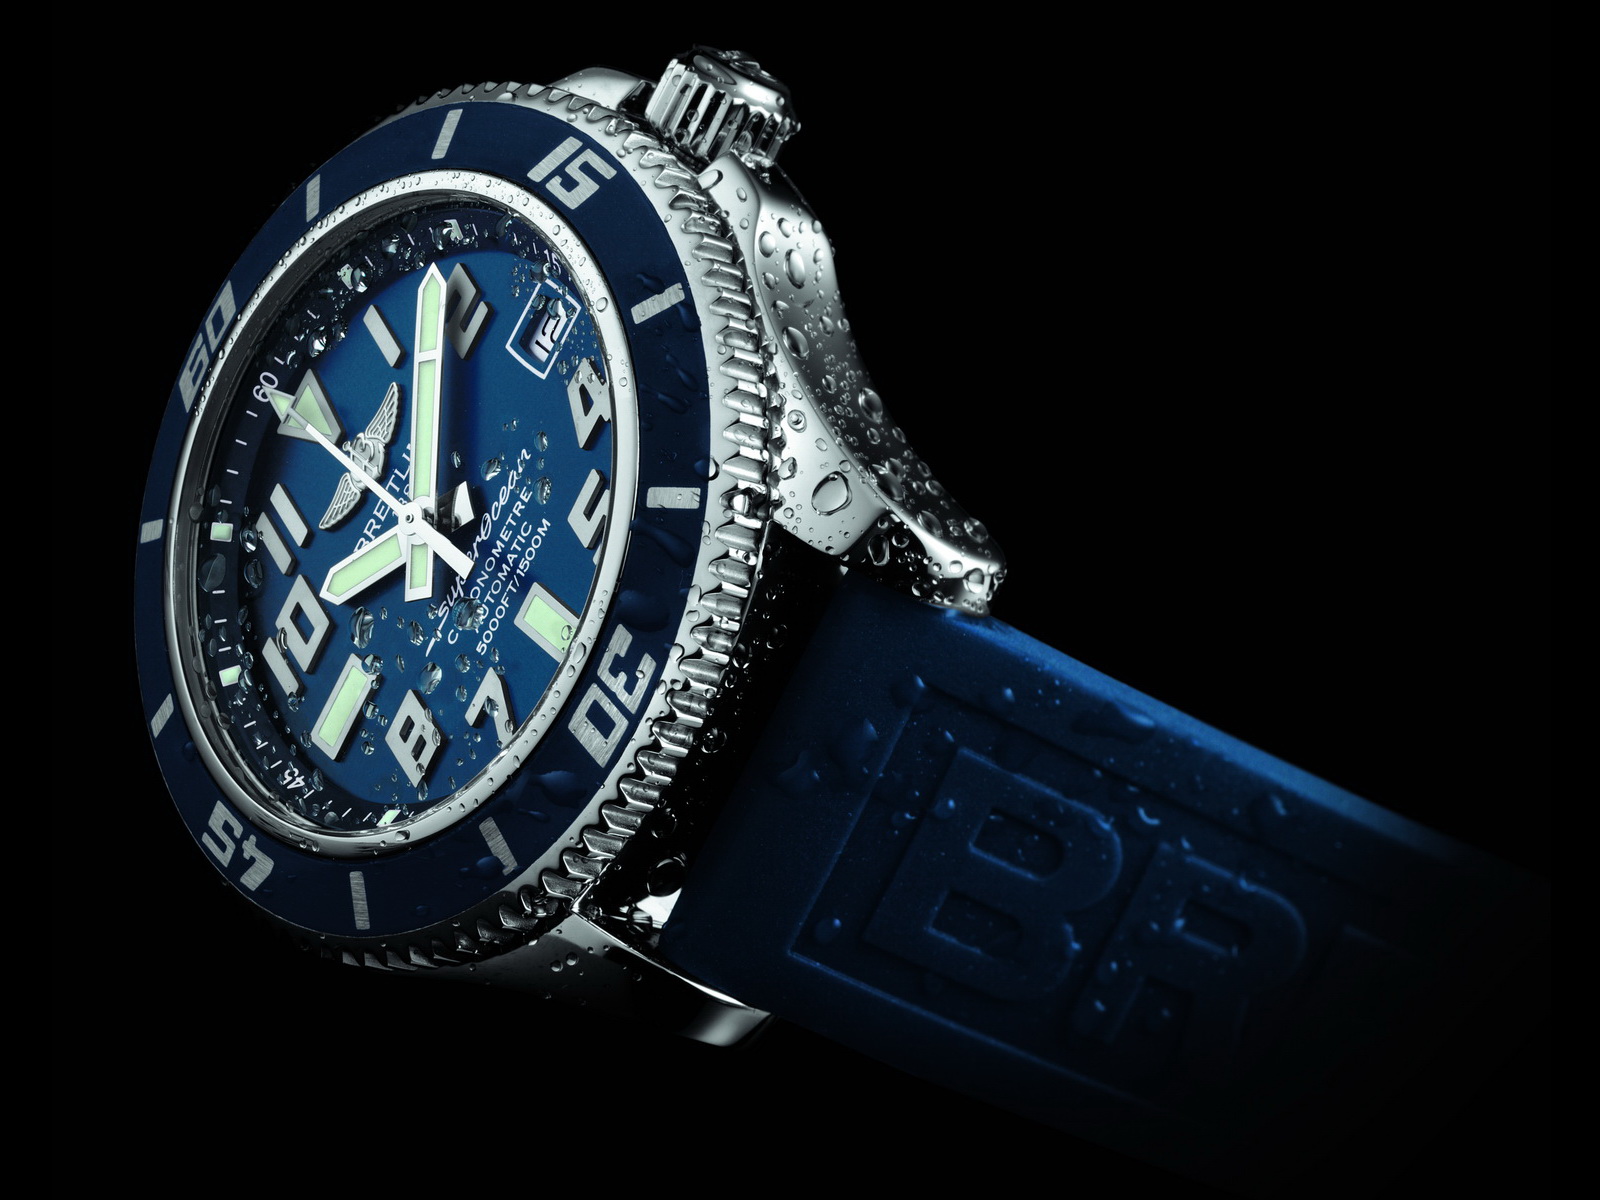 Breitling-Copy-Watches